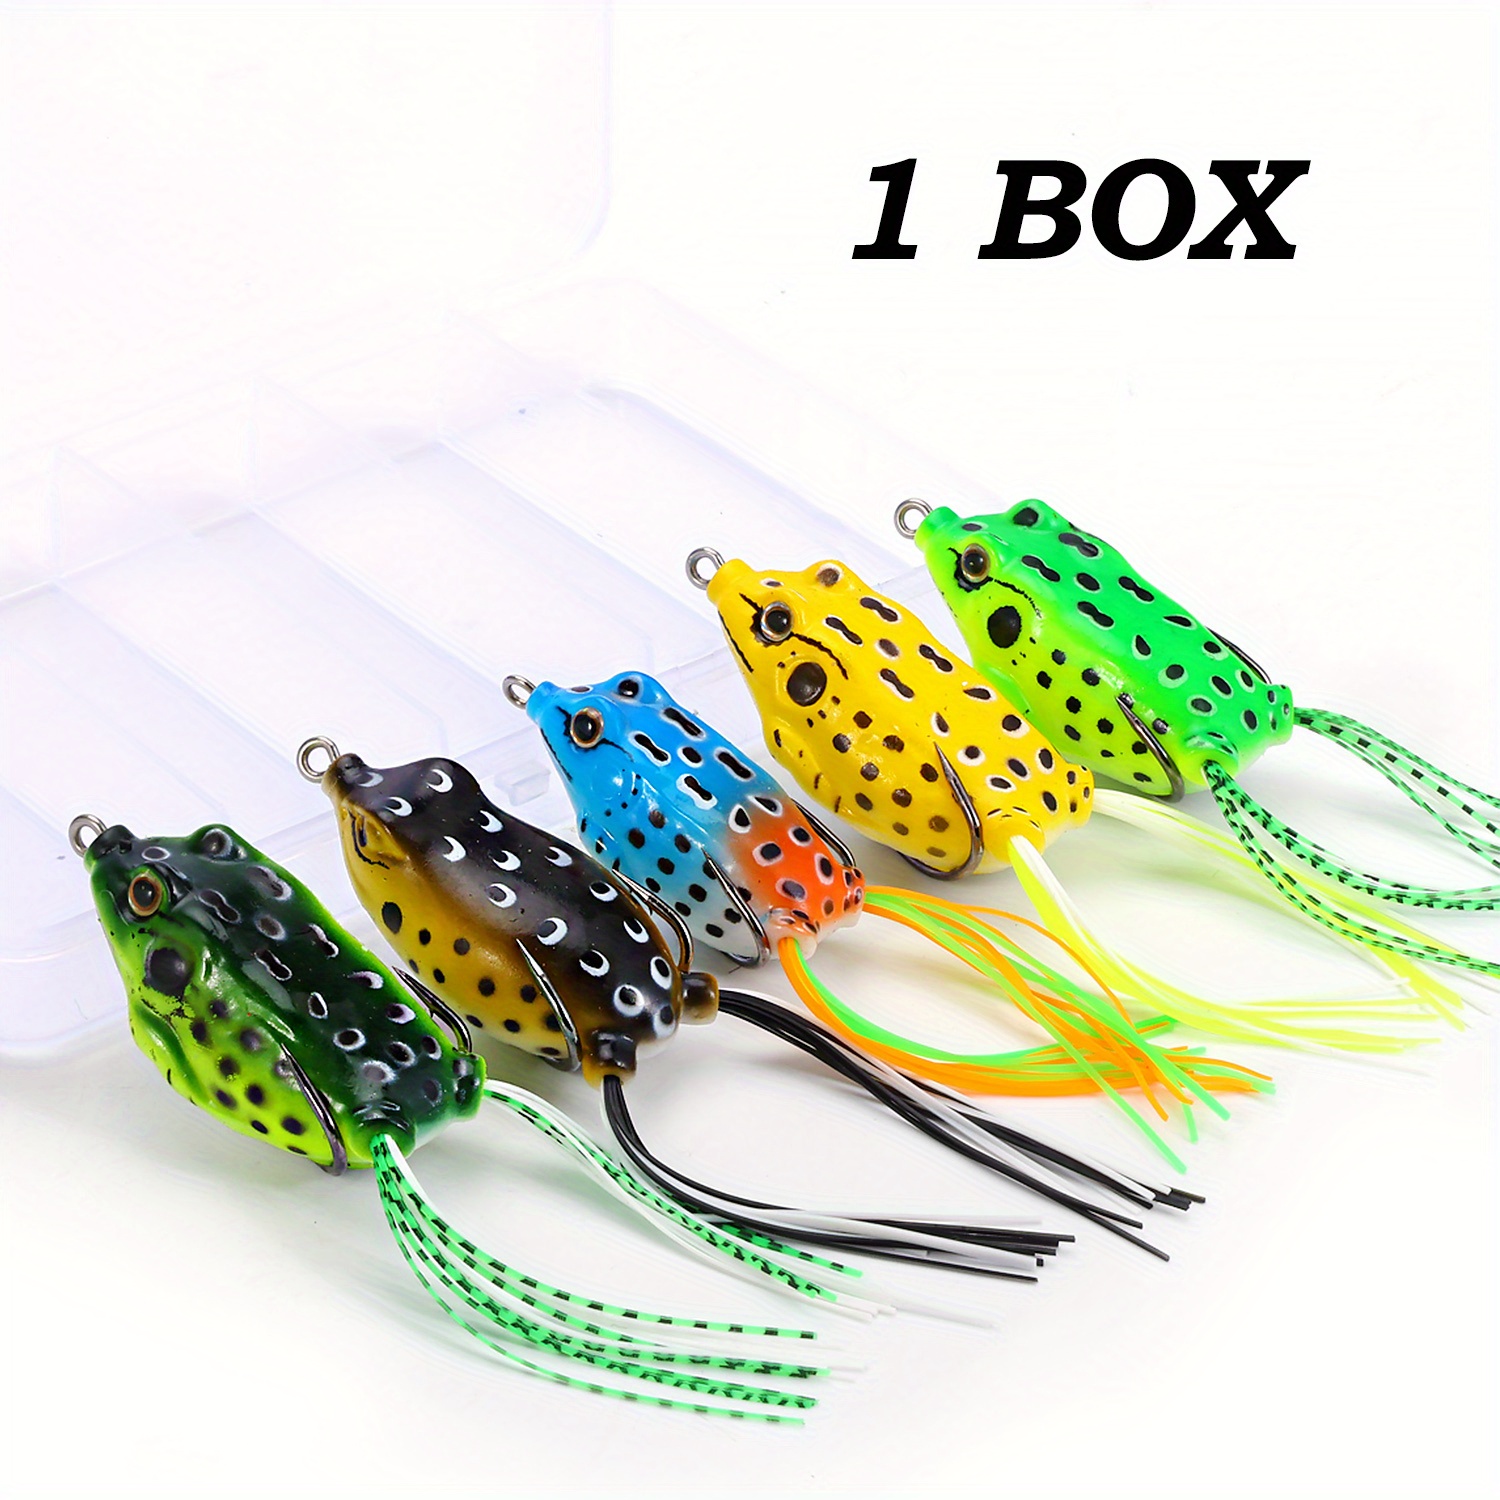 Dropship Bionic Bait VIB Thunder Frog Soft Bait; Decoy Lure With Bright  Slice; Bait Set to Sell Online at a Lower Price